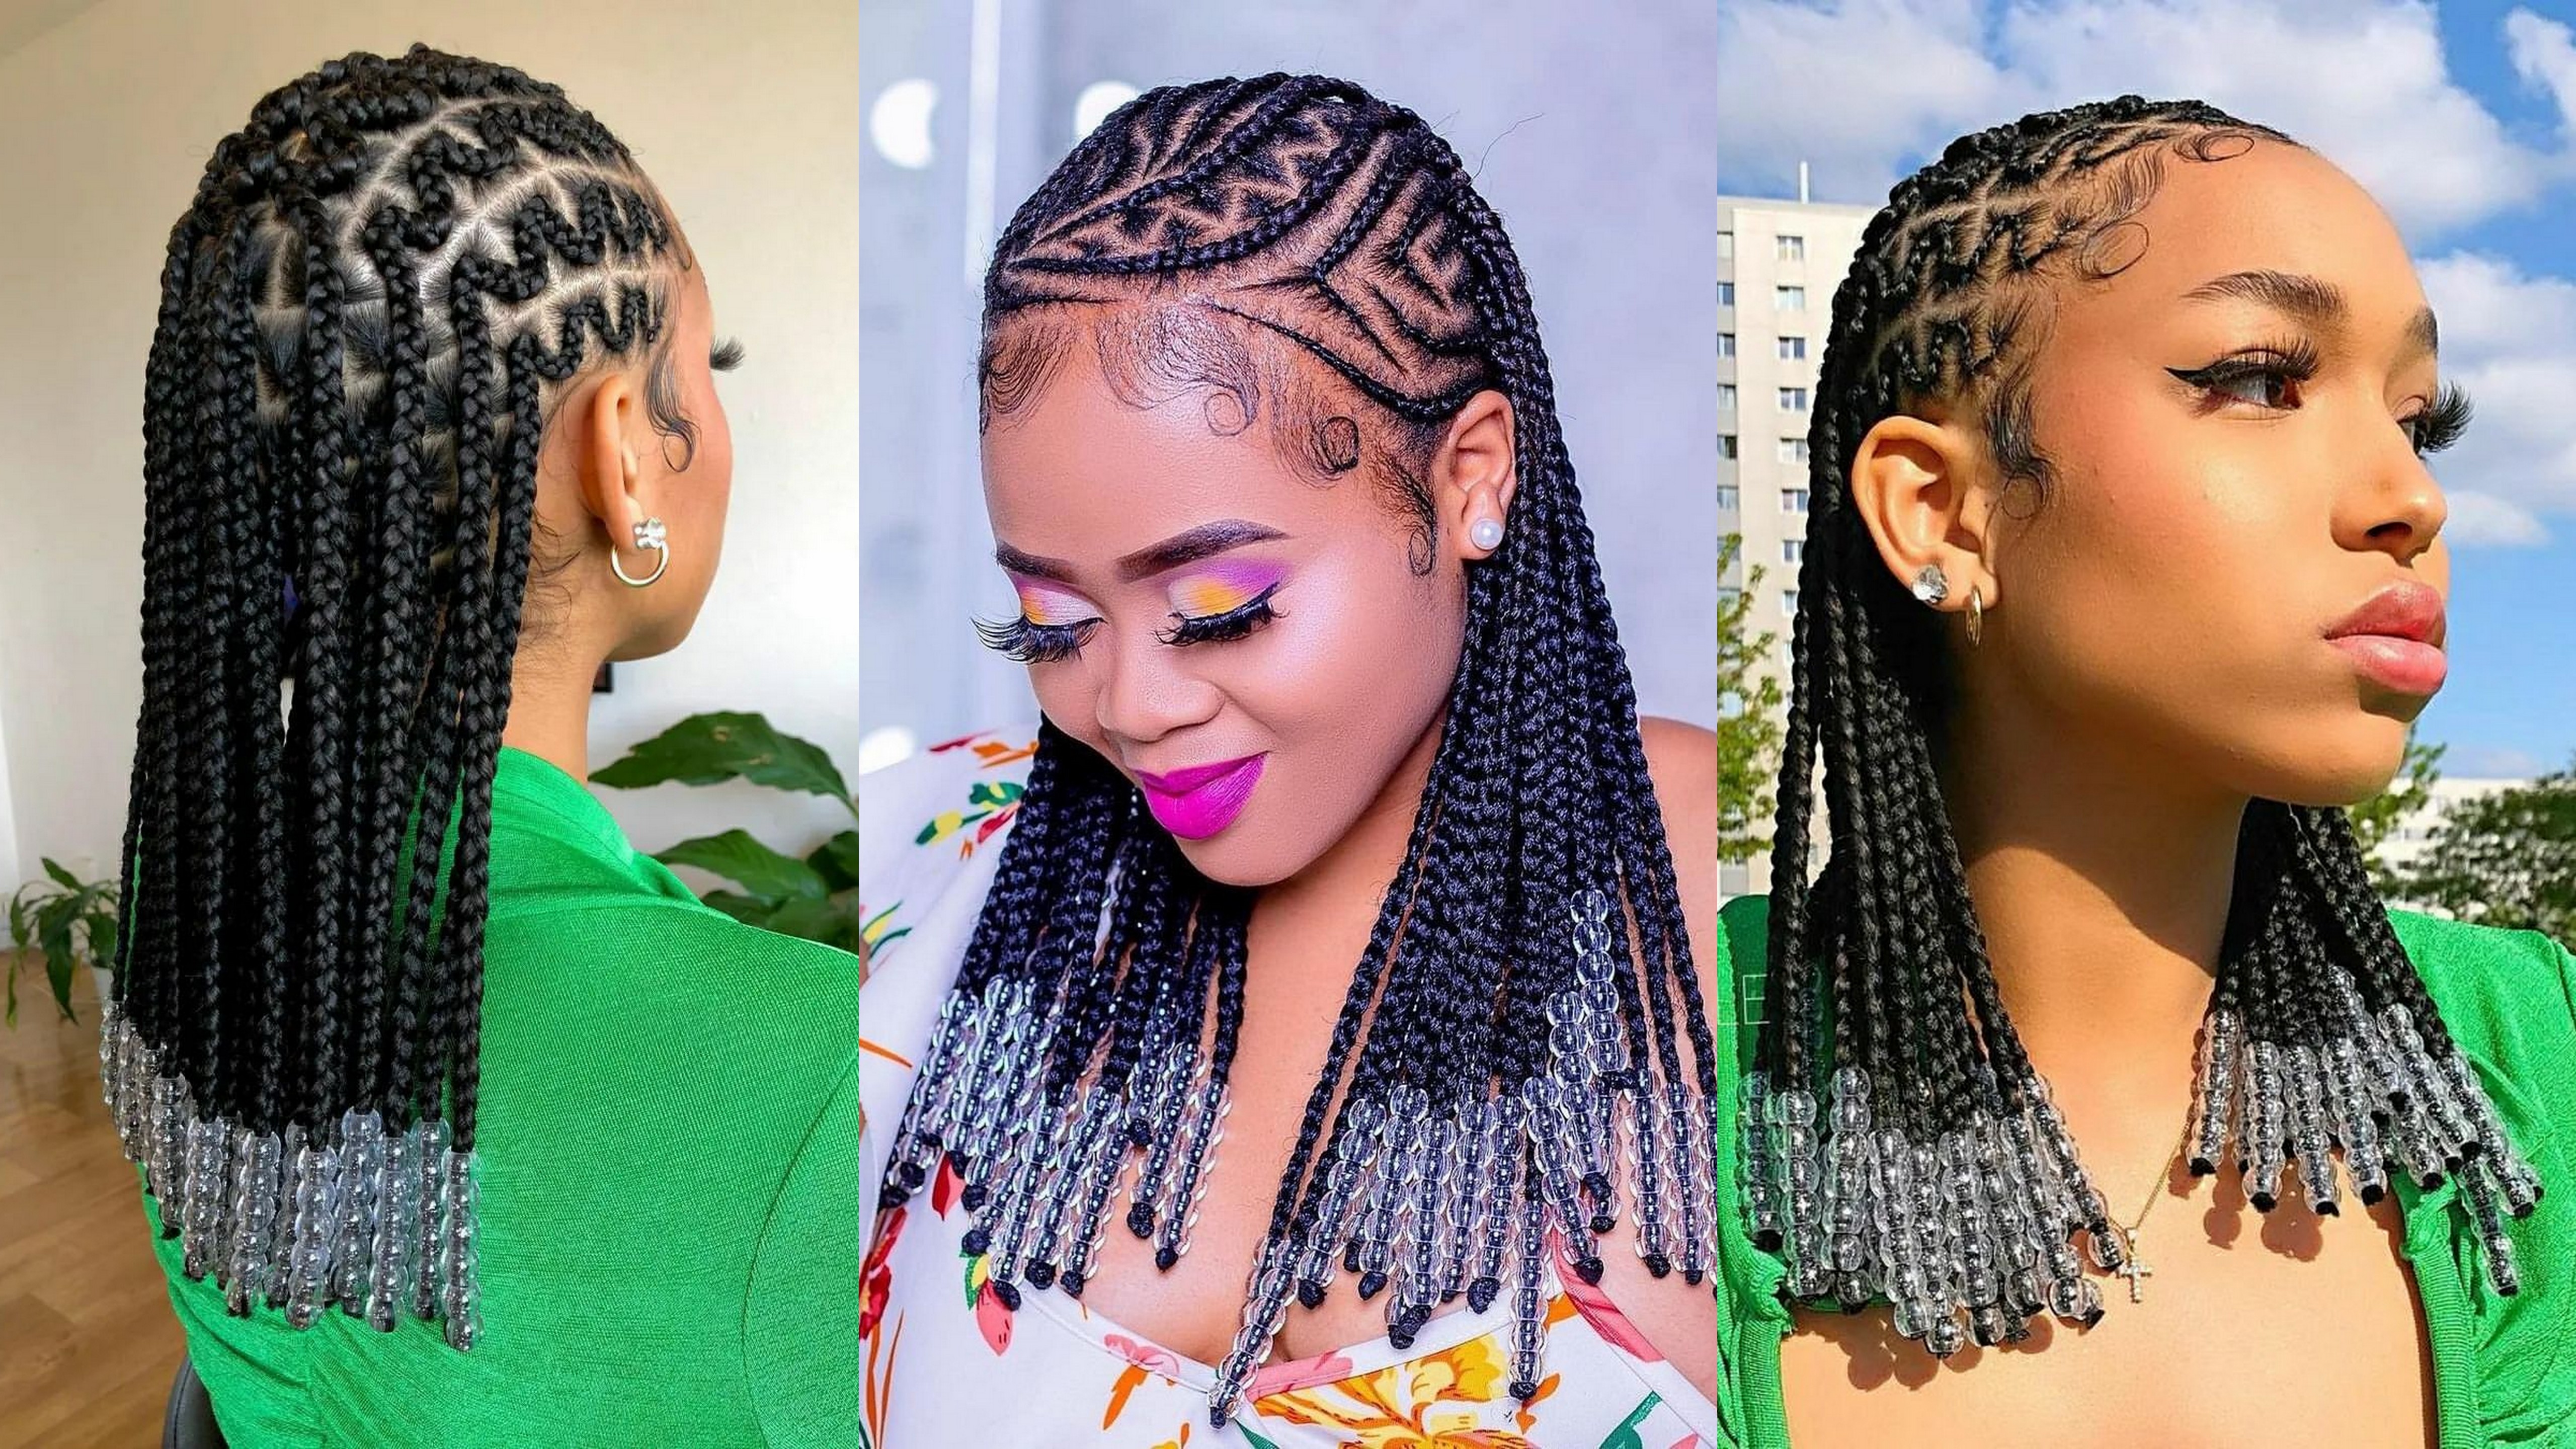 Kids braided hairstyles with beads - Legit.ng